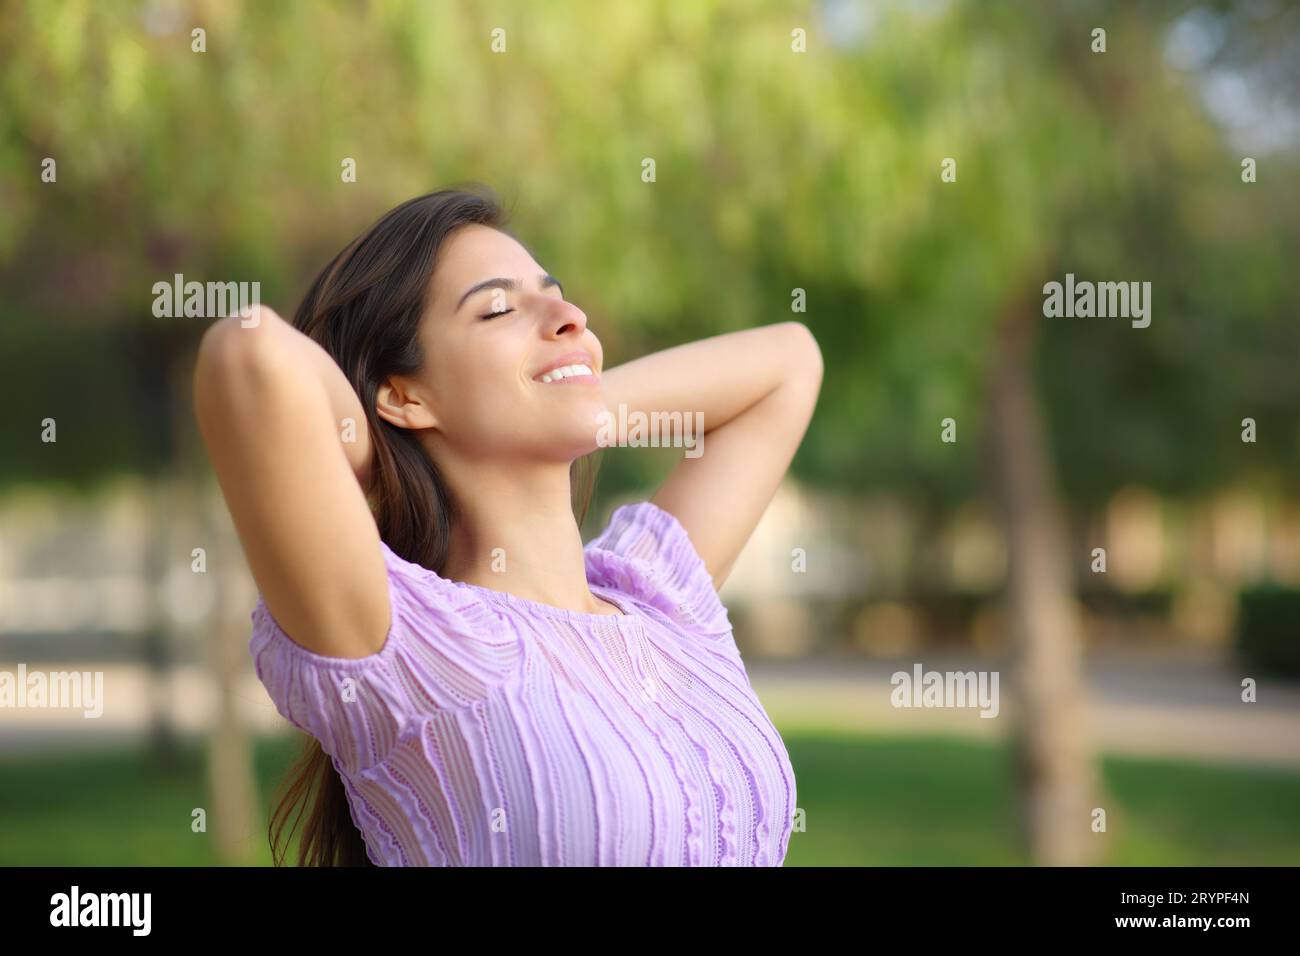 Happy woman relaxing with hands on head in a park alone Stock Photo